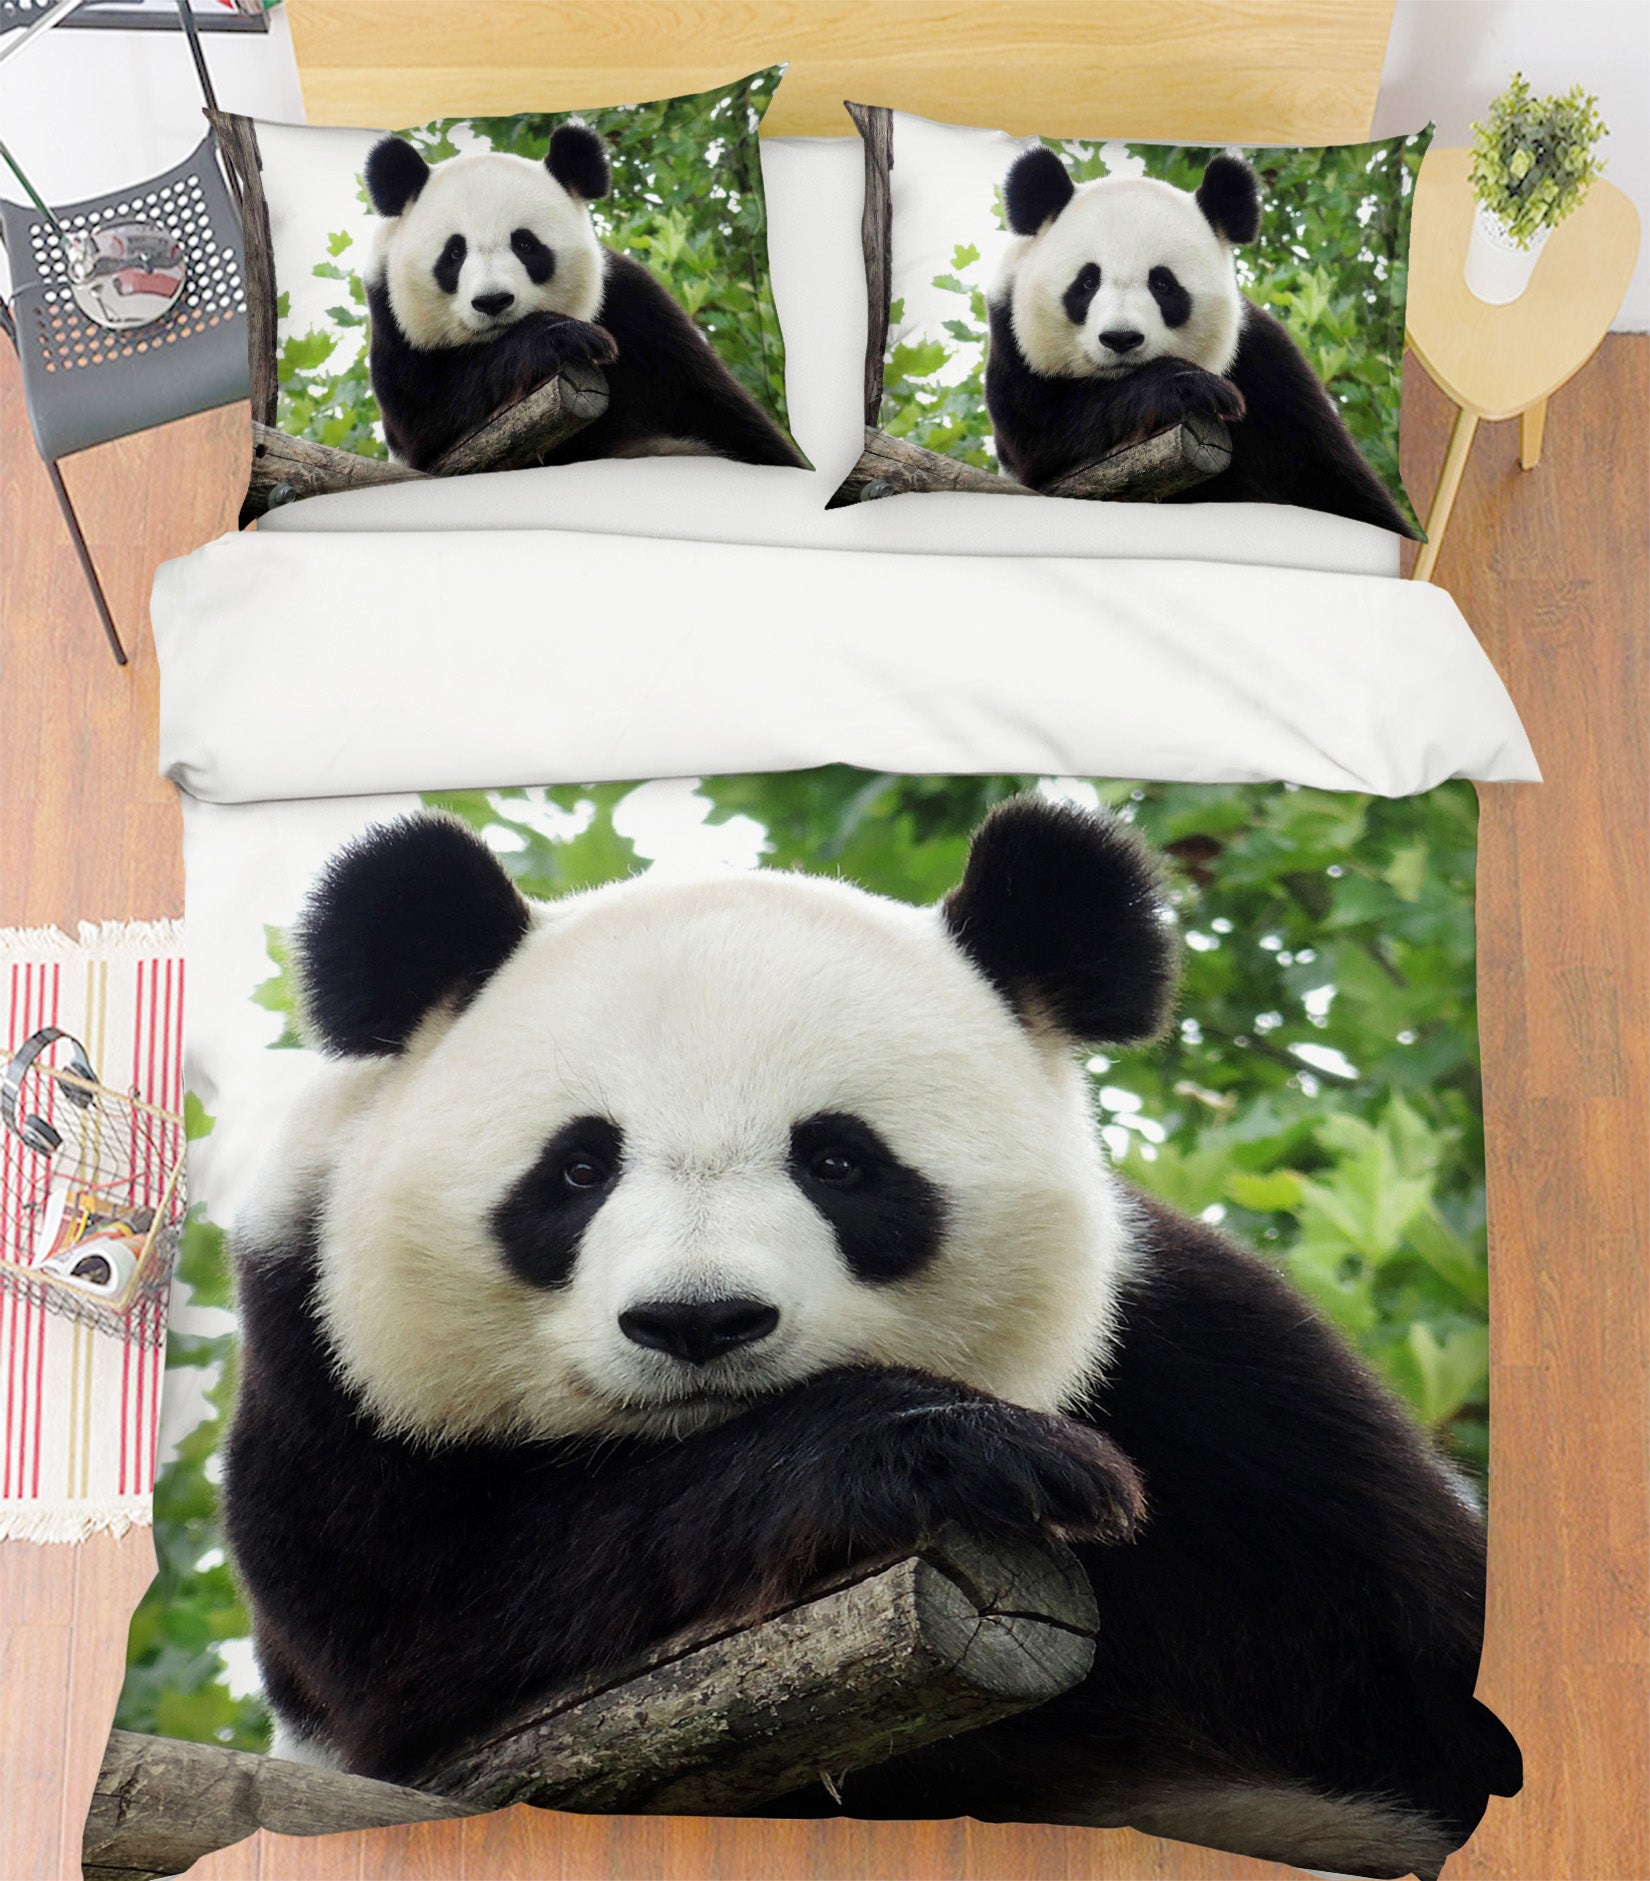 3D Leisurely Panda 127 Bed Pillowcases Quilt